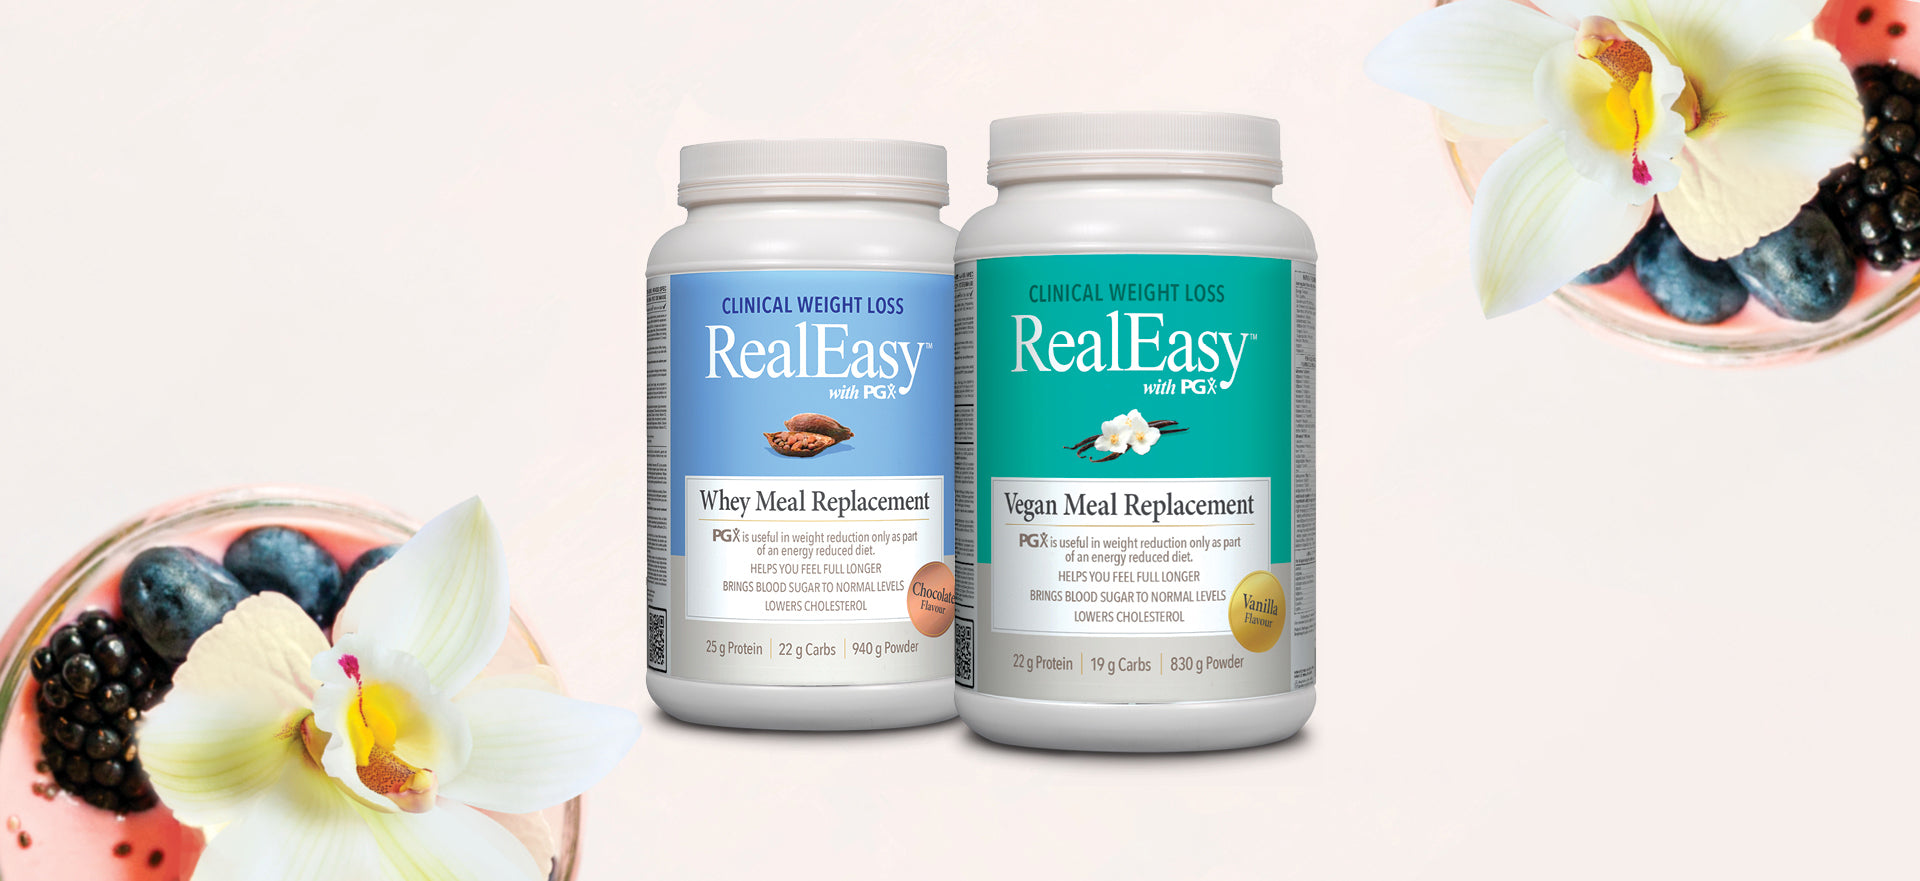 RealEasy, Whey & vegan meal replacement bottles